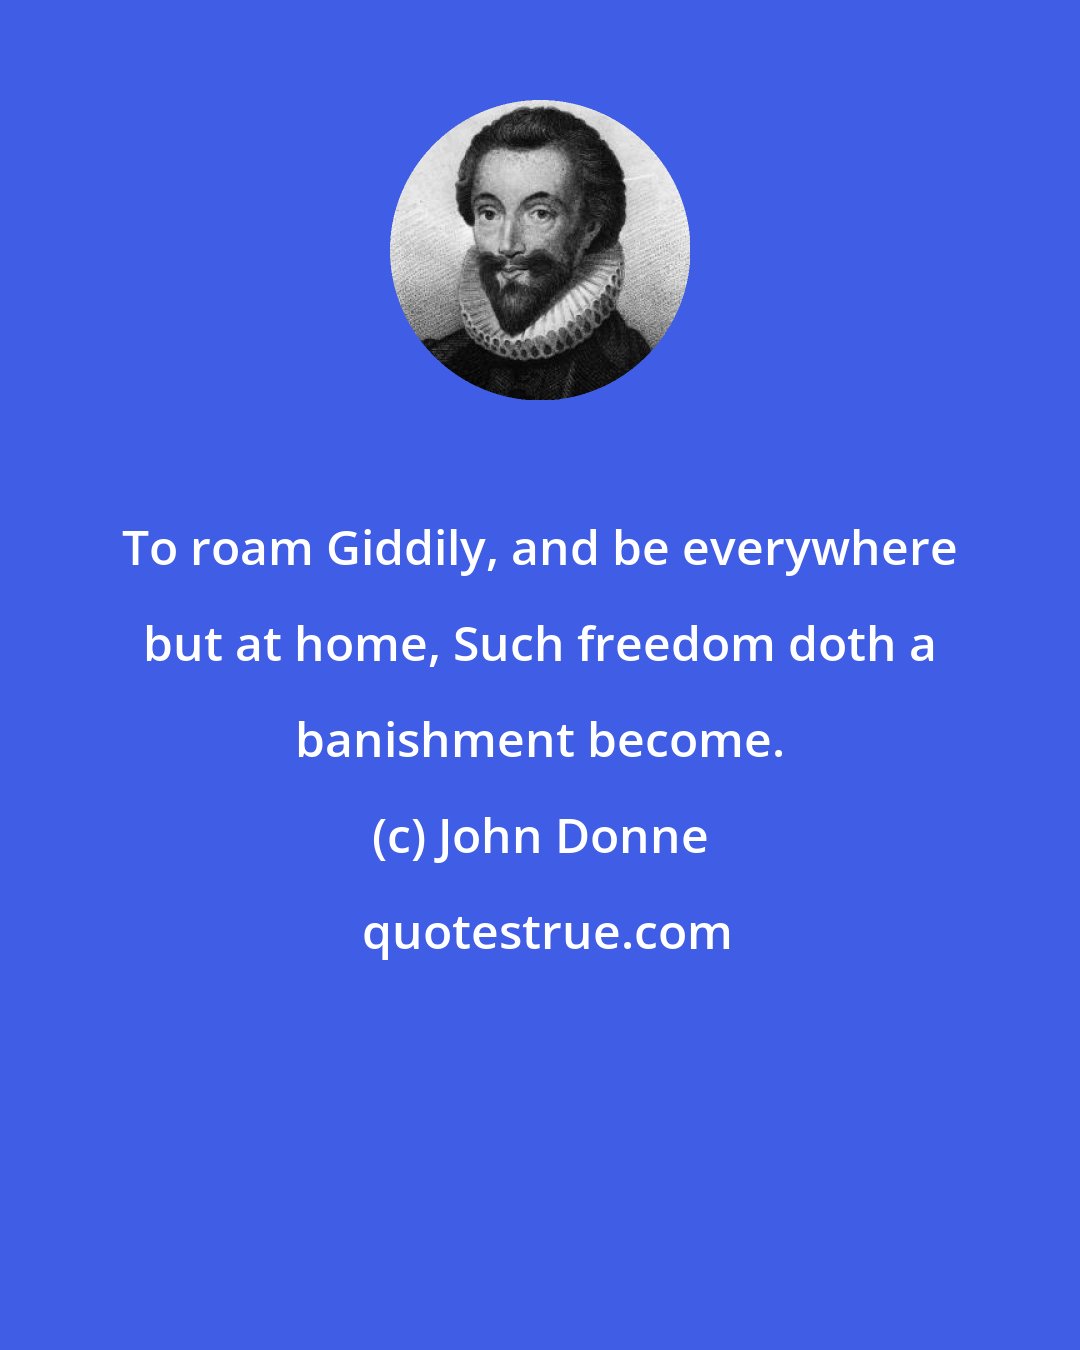 John Donne: To roam Giddily, and be everywhere but at home, Such freedom doth a banishment become.